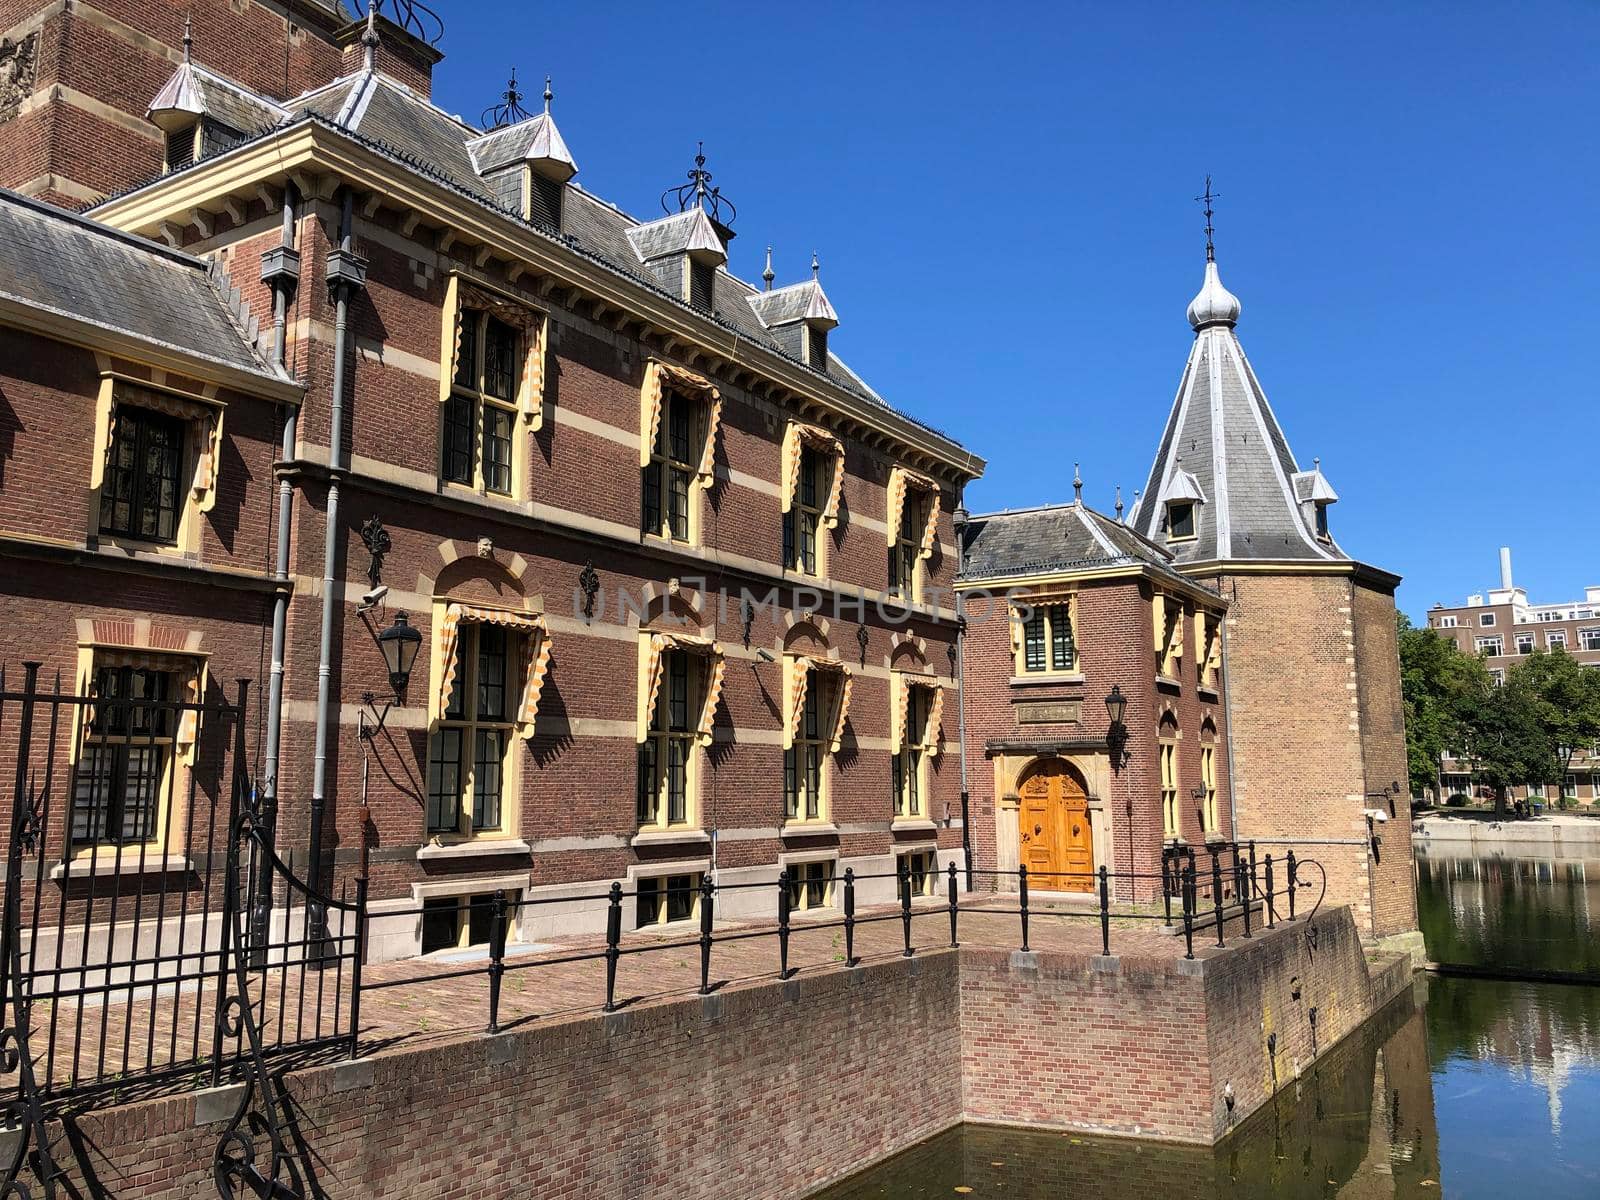 The Binnenhof and Hofvijver in The Hague, The Netherlands